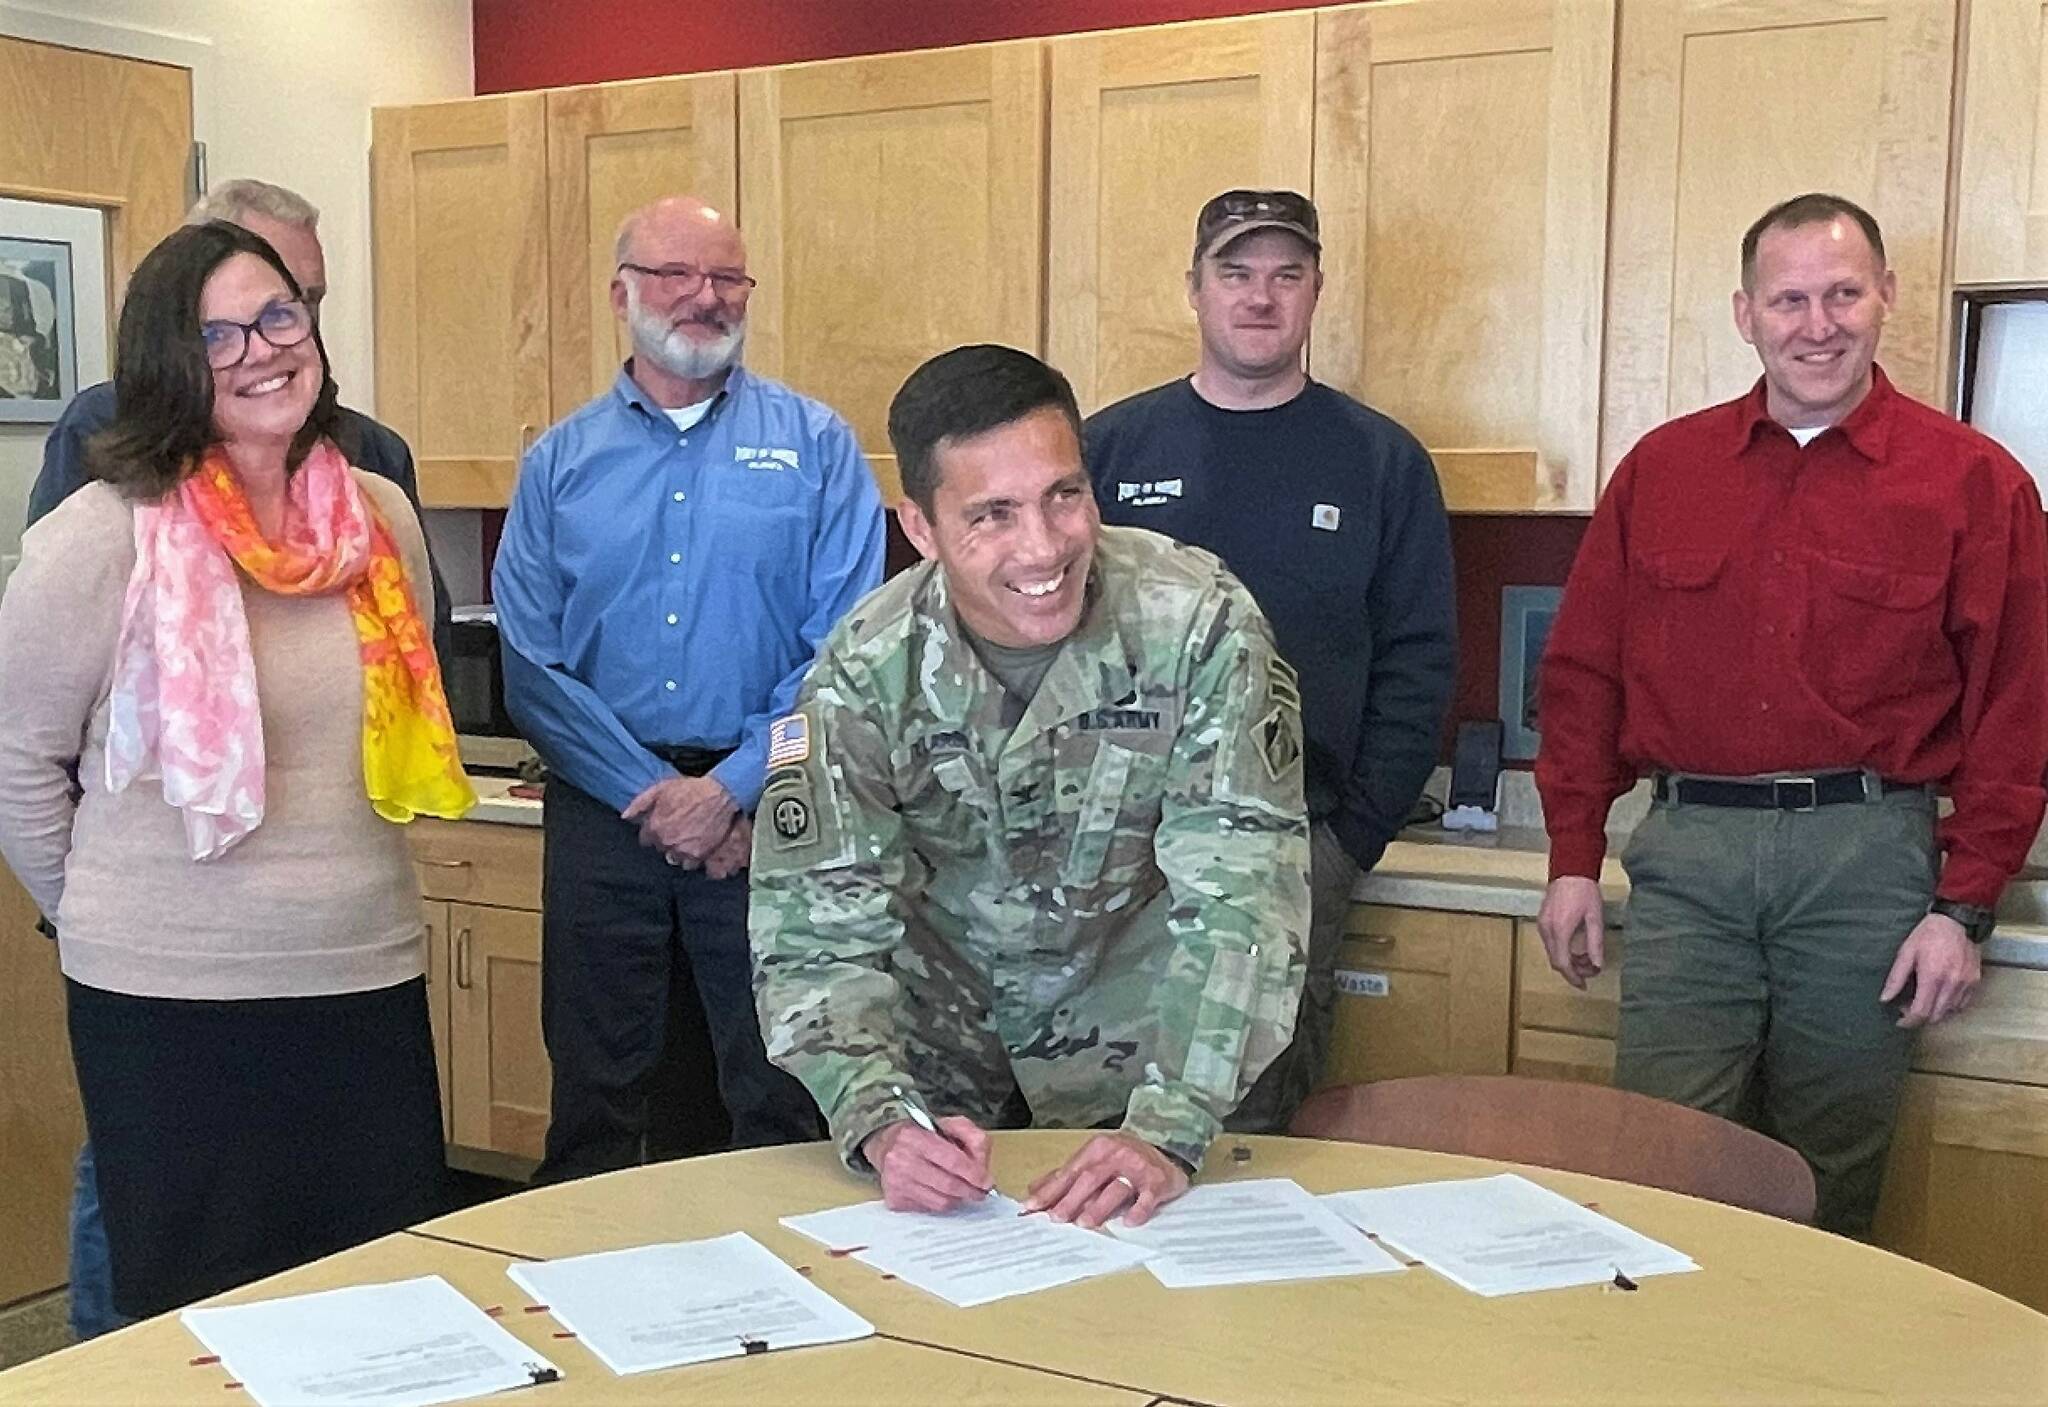 Photo provided by Jenny Carroll
Col. Damon Delarosa, Alaska District Commander USACE (front) signs the feasibility cost-share agreement with the City of Homer on Wednesday, March 29 at the Harbormaster’s Office. Pictured in the back from left to right are Melissa Jacobsen, City Clerk & Acting City Manager; Bryan Hawkins, Harbormaster & Port Director; Aaron Glidden, Port Maintenance Supervisor; and Bruce Sexauer, Chief, Civil Works Project Management at USACE.